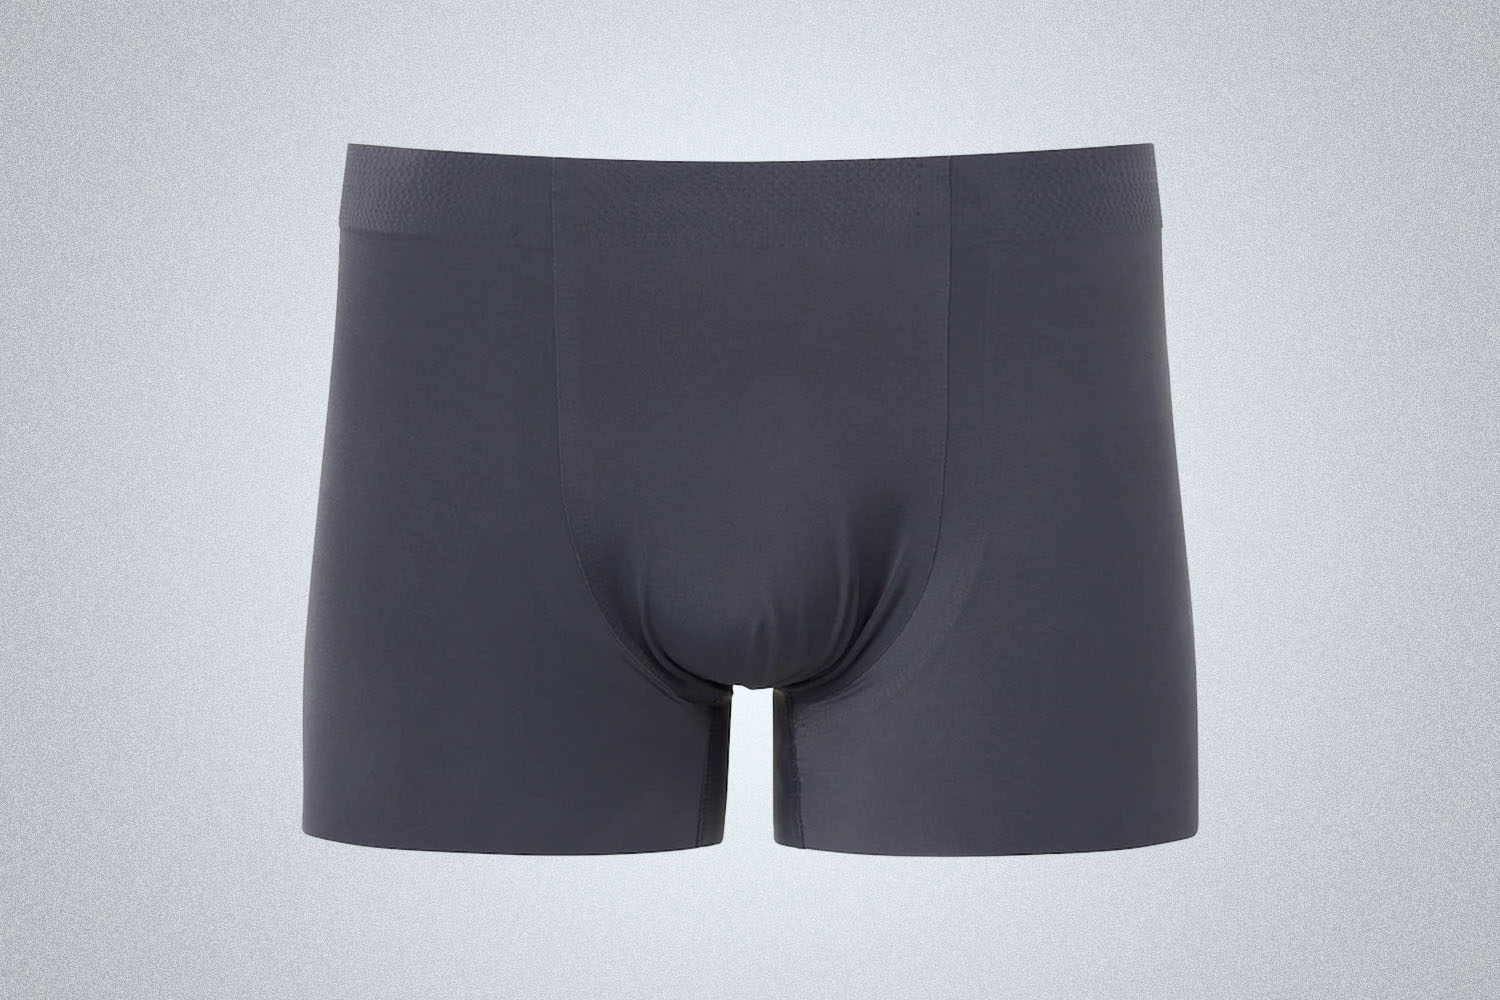 a pair of dark grey seamless Uniqlo Airism Briefs on a gray background